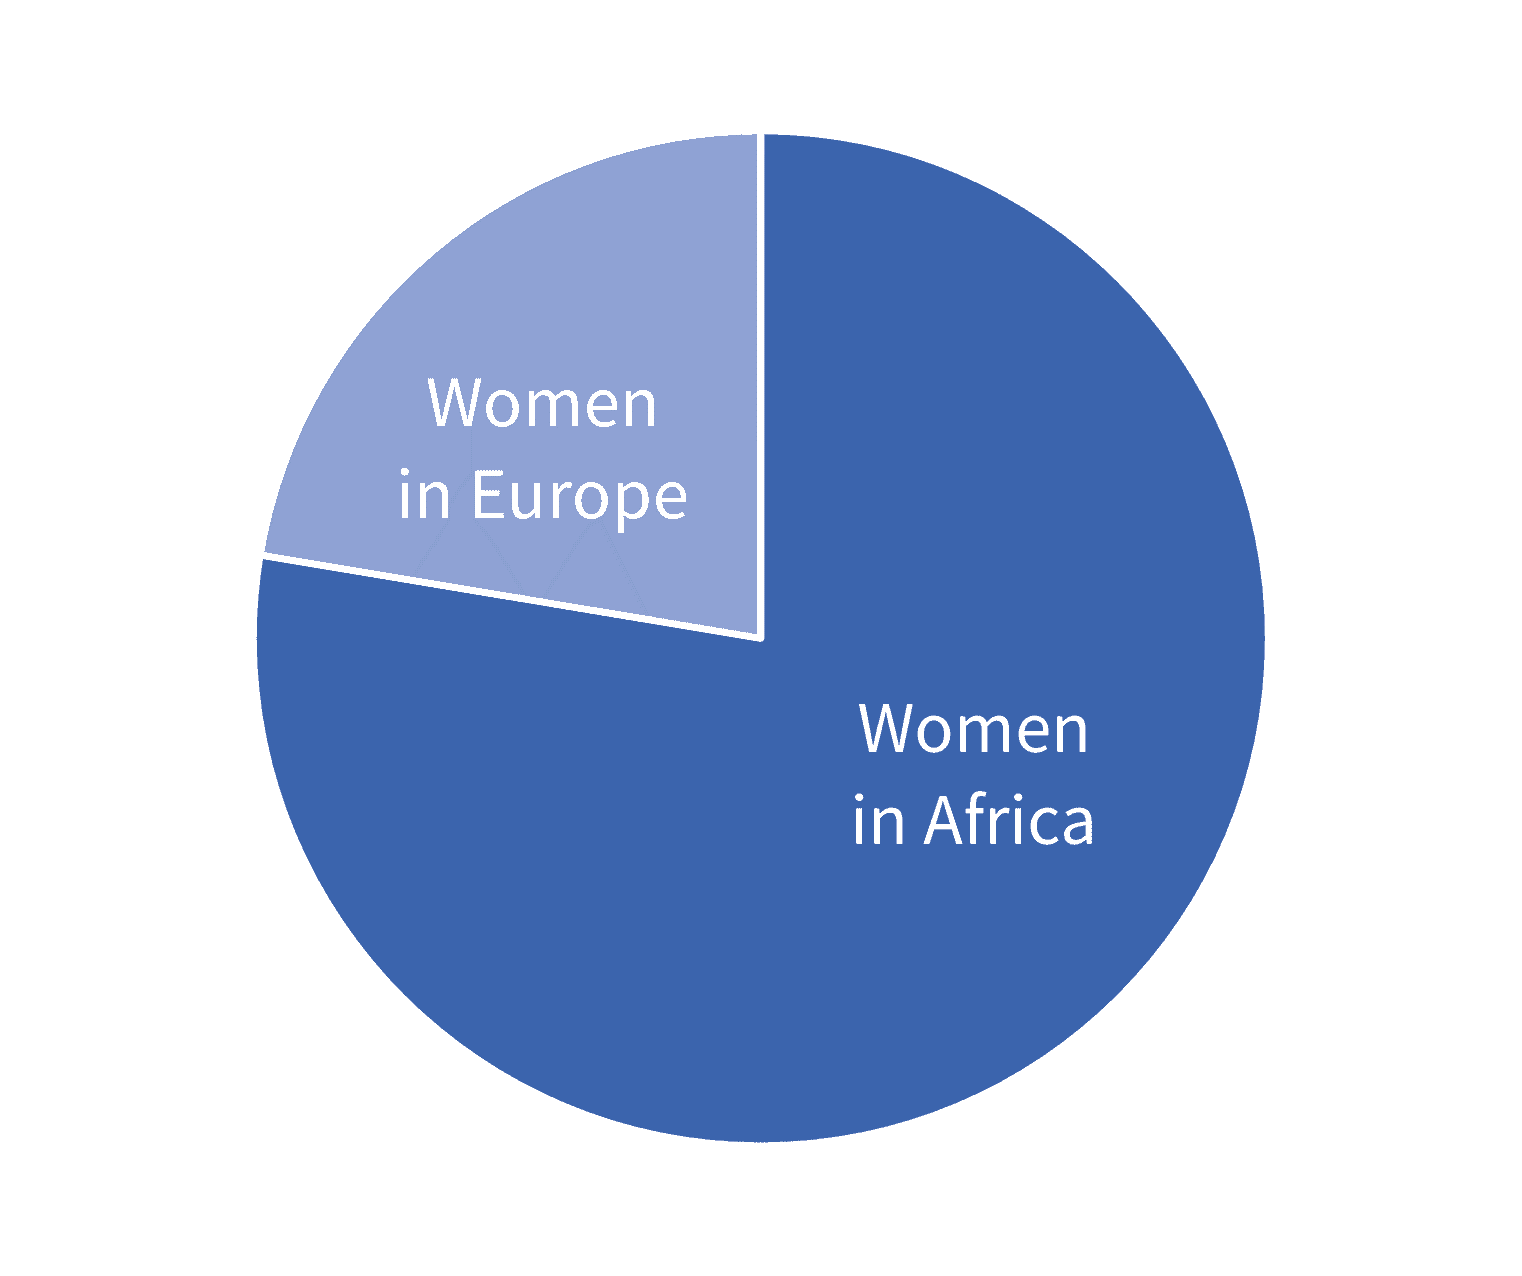 Rates of human papillomavirus (HPV) in women in Africa are nearly 3x that of women in Europe.